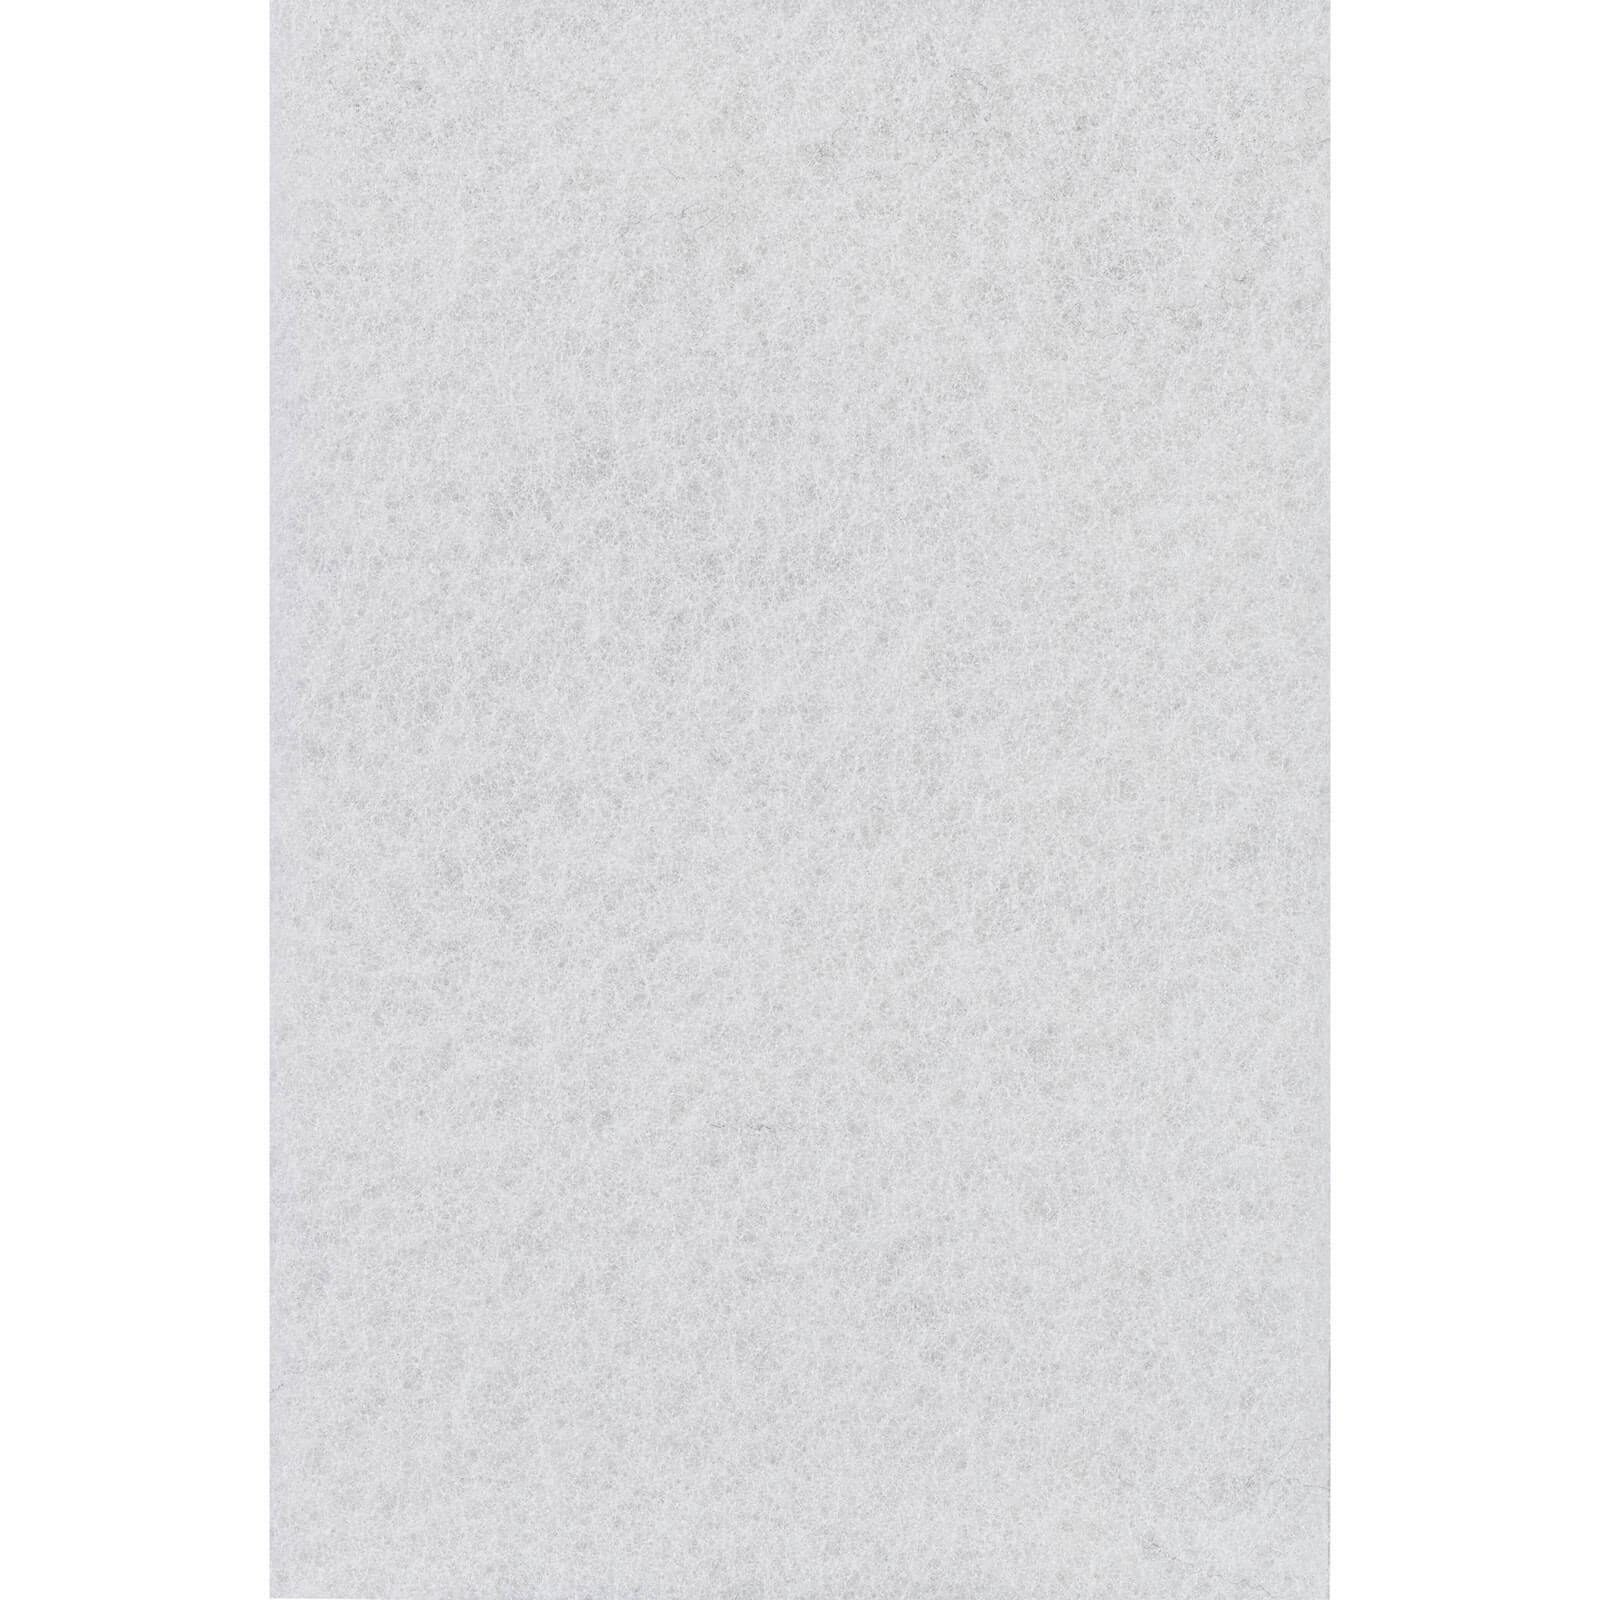 Photo of Bosch Fleece Hand Pad Cleaning White Pack Of 1